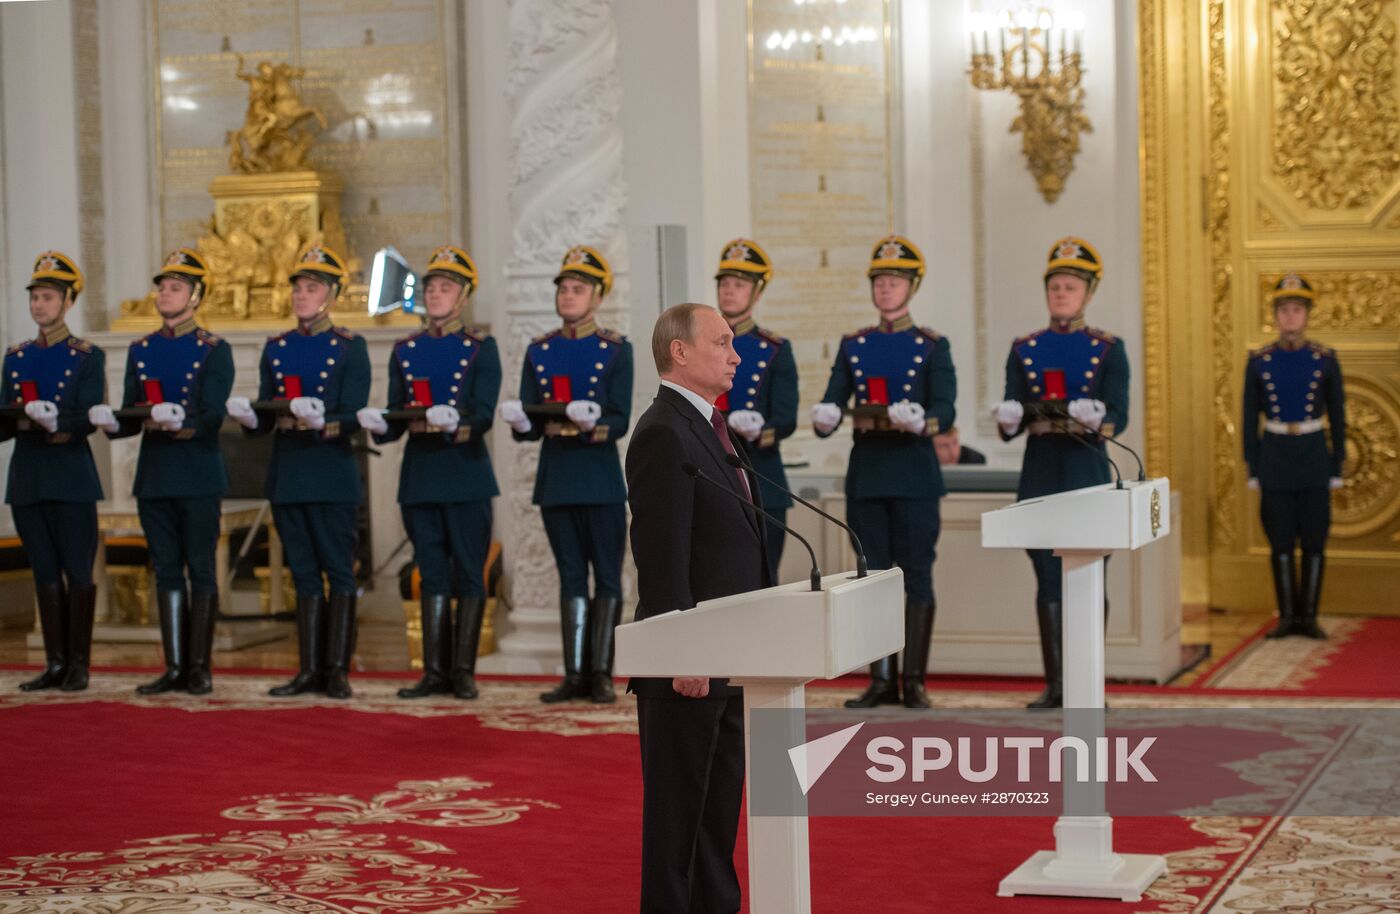 Ceremony to present Russian Federation National Awards